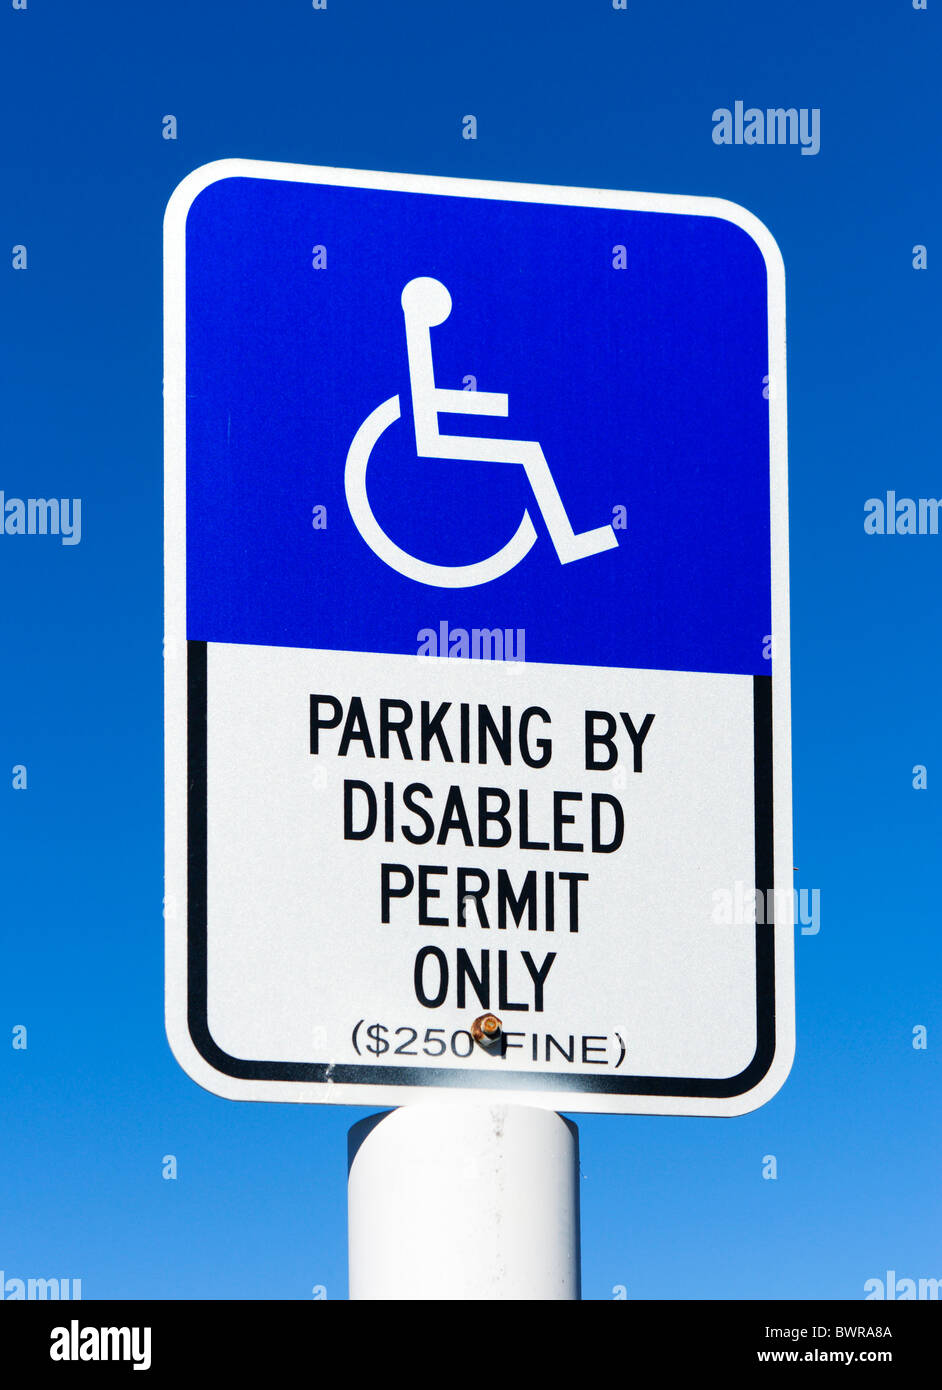 Parking by Disabled Permit Only sign, Florida, USA Stock Photo